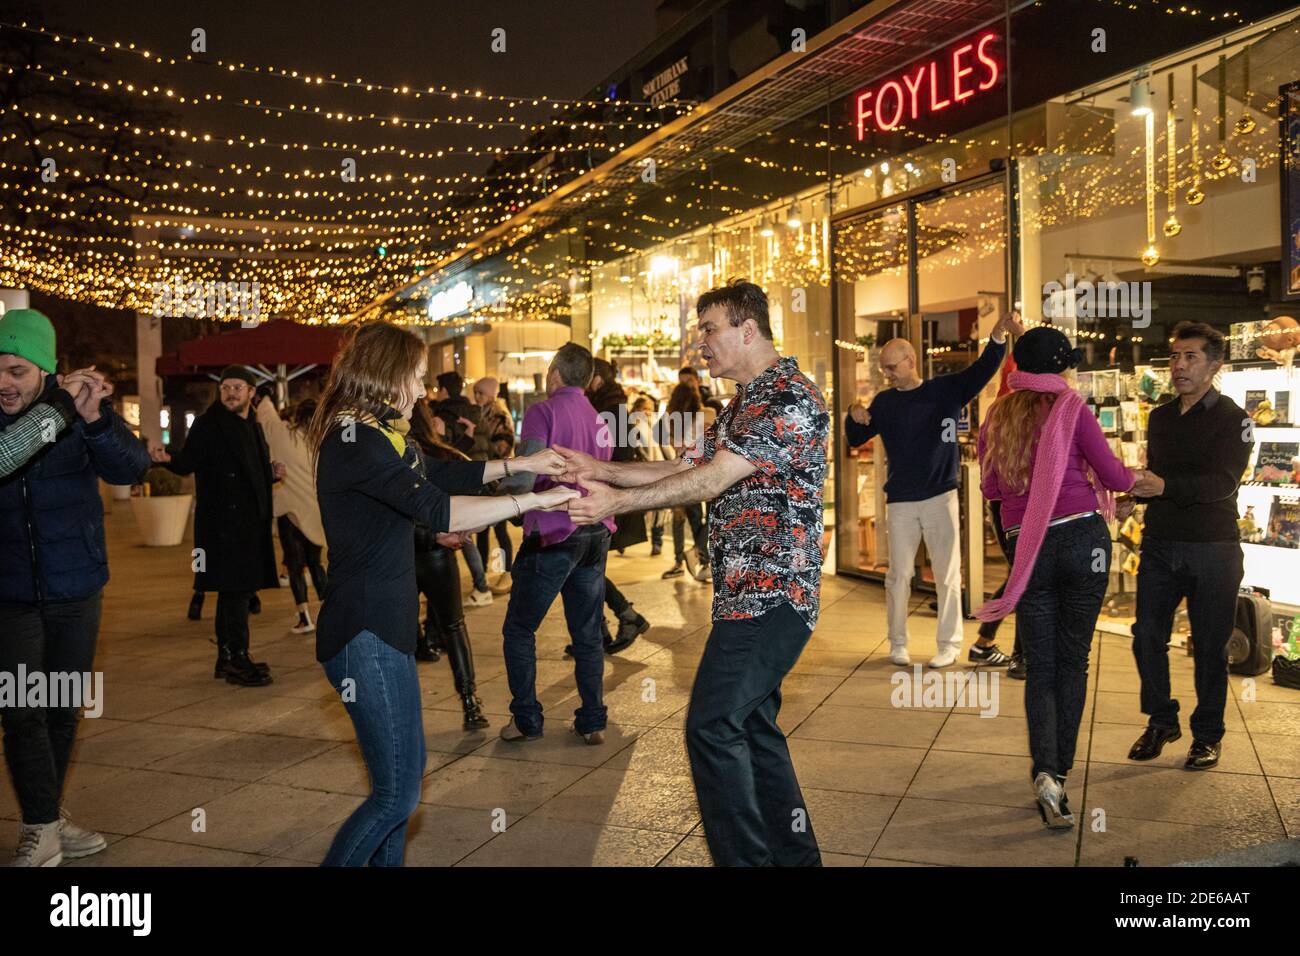 Salsa dancing, social distanced dancing outside the FOYLES bookstore along the Southbank during the coronavirus lockdown#2 restrictions, London, UK Stock Photo